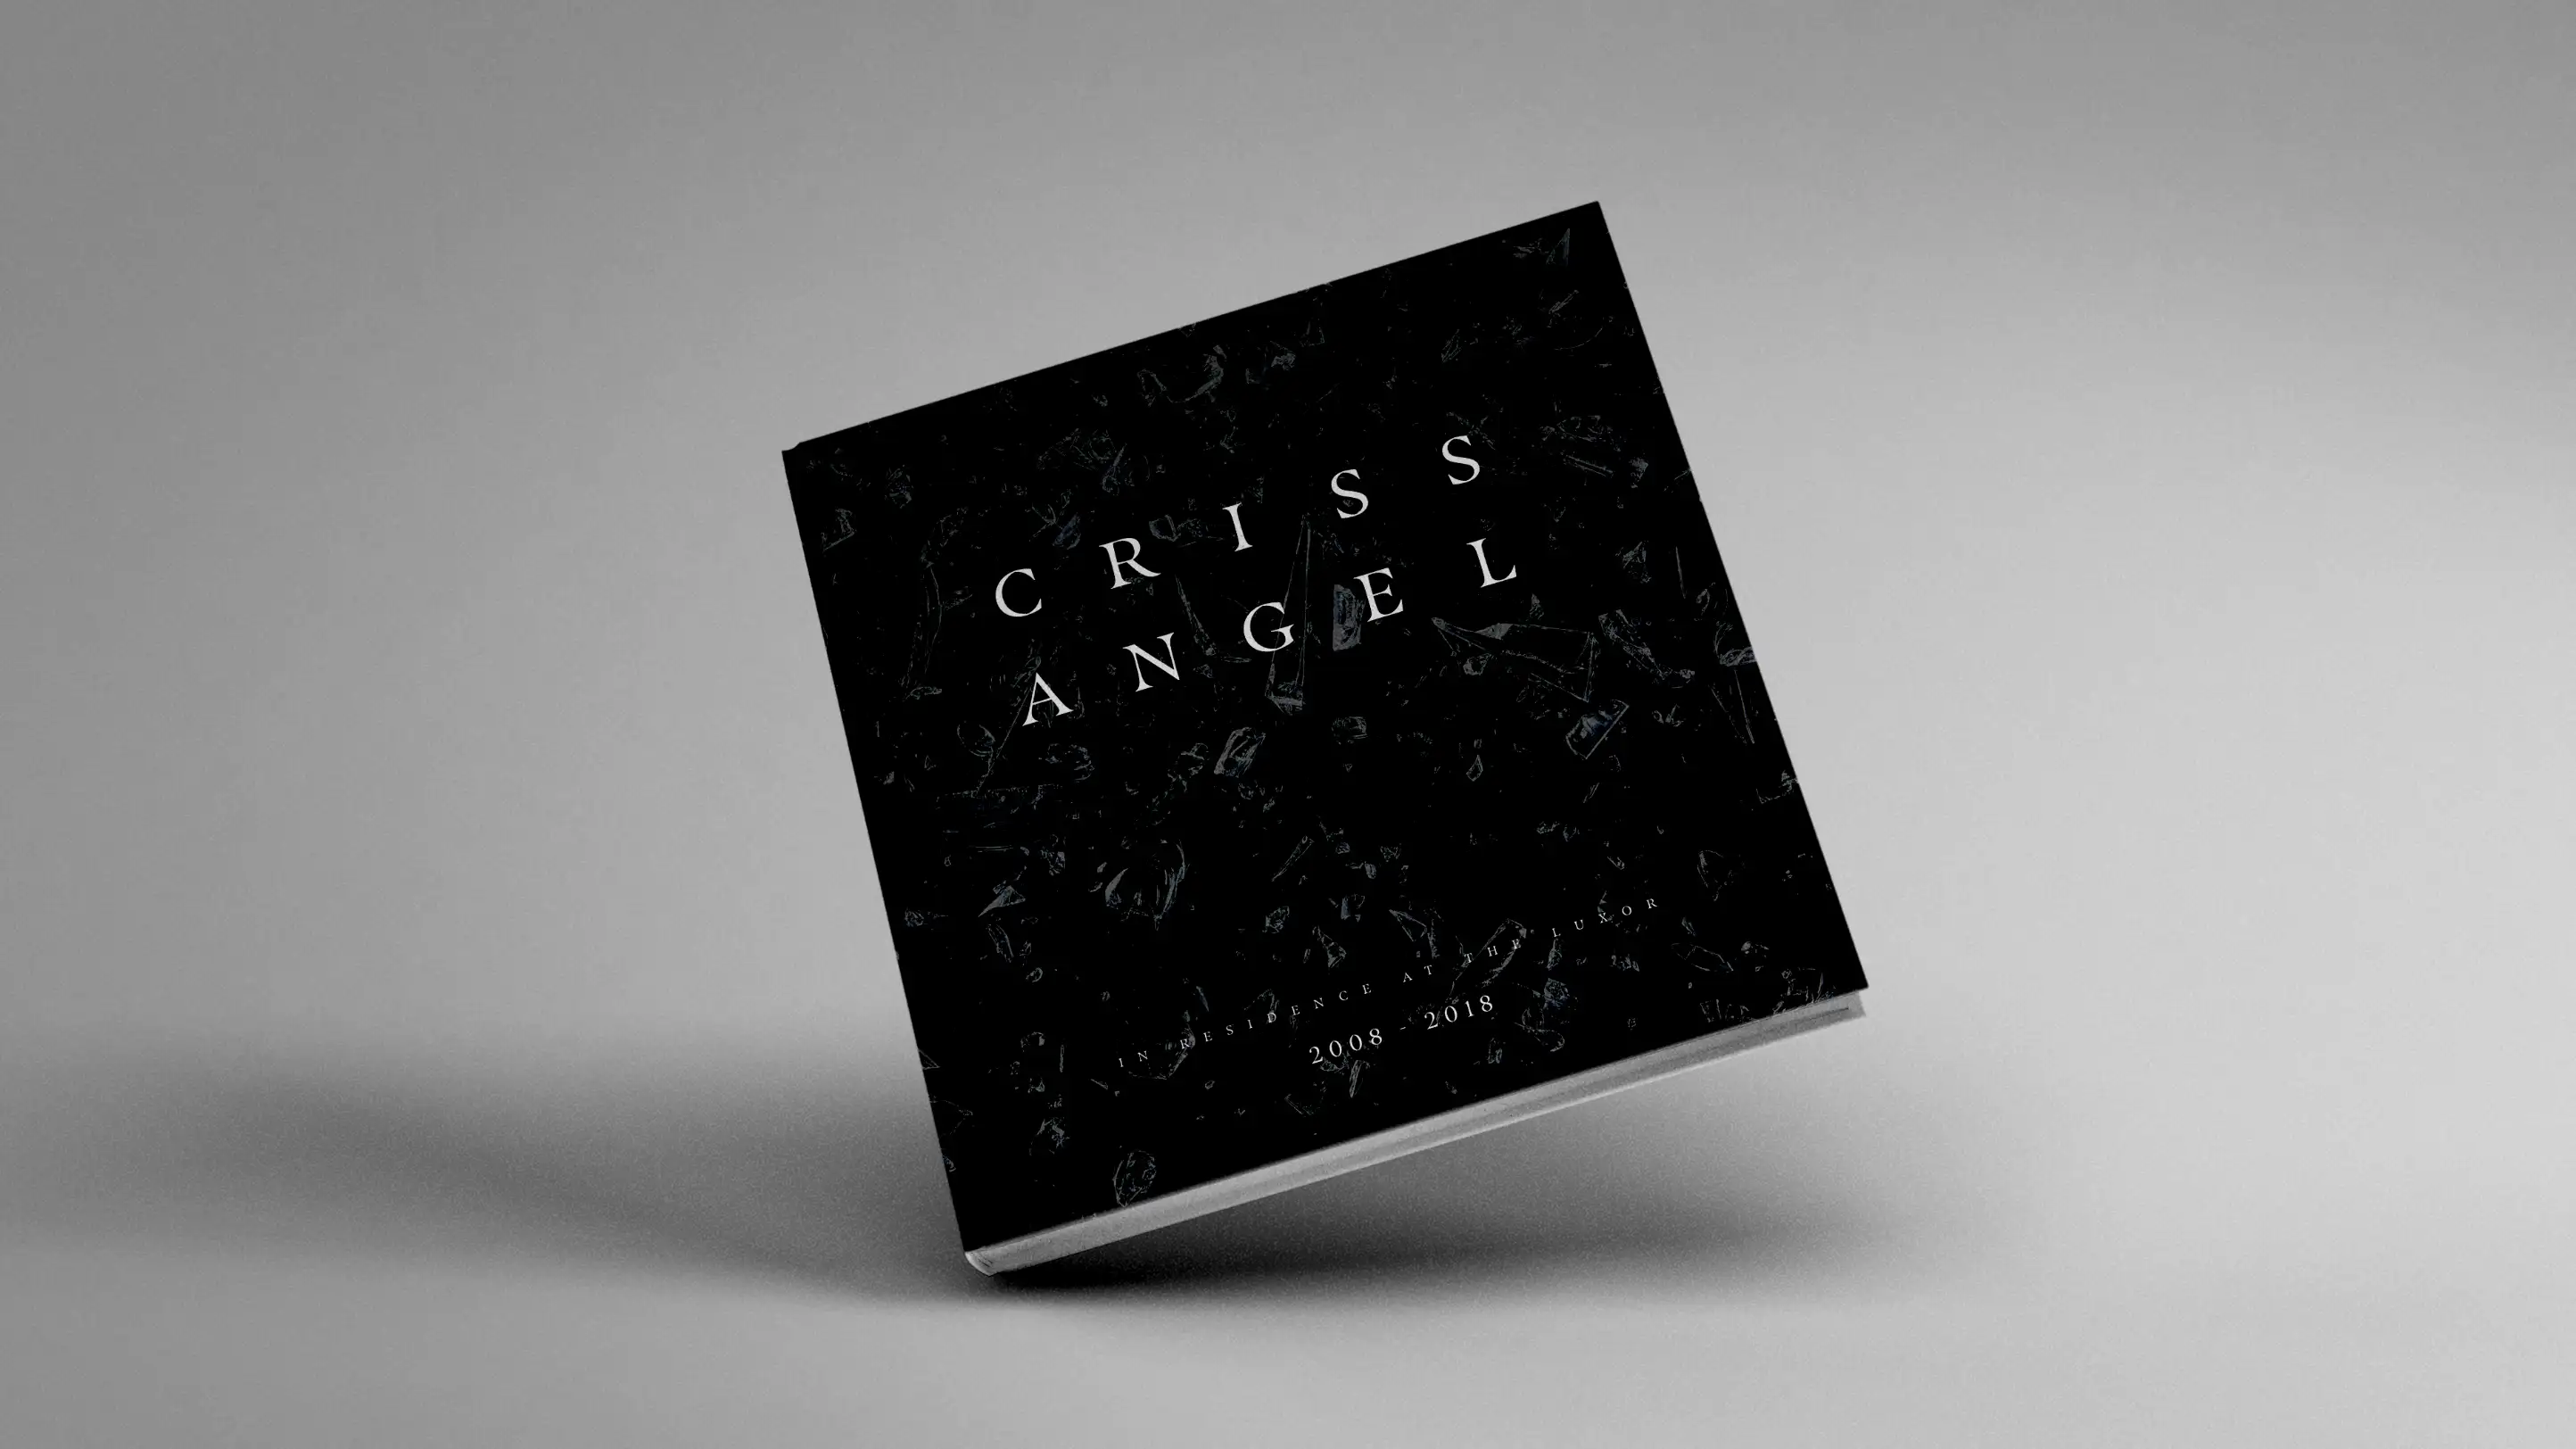 Criss Angel book cover.